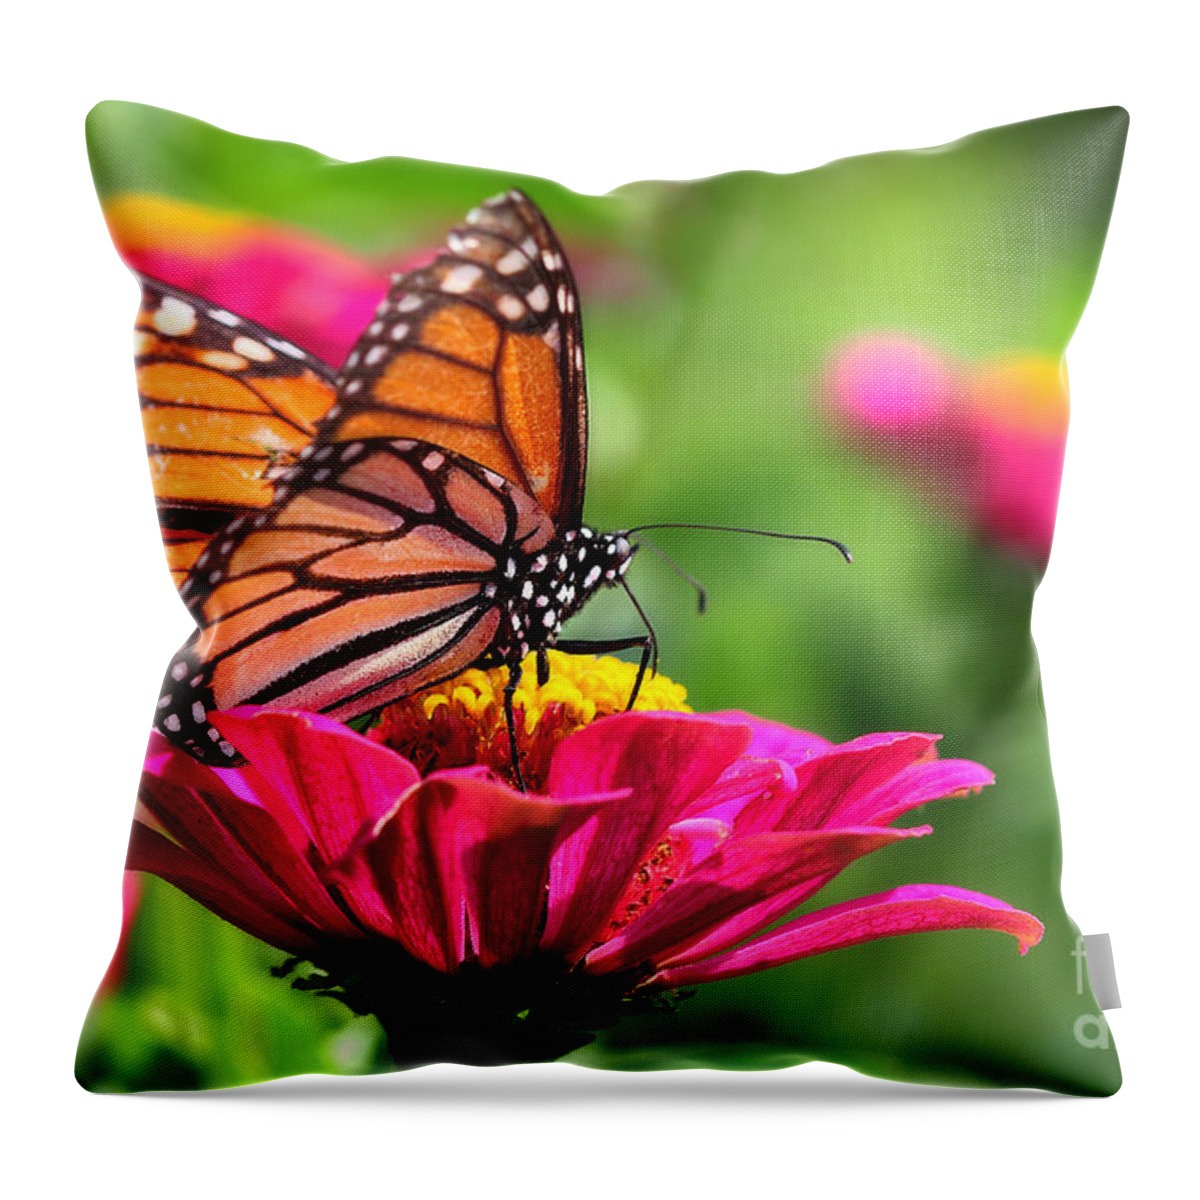 Pink Throw Pillow featuring the photograph Monarch Visiting Zinnia by Angela Rath